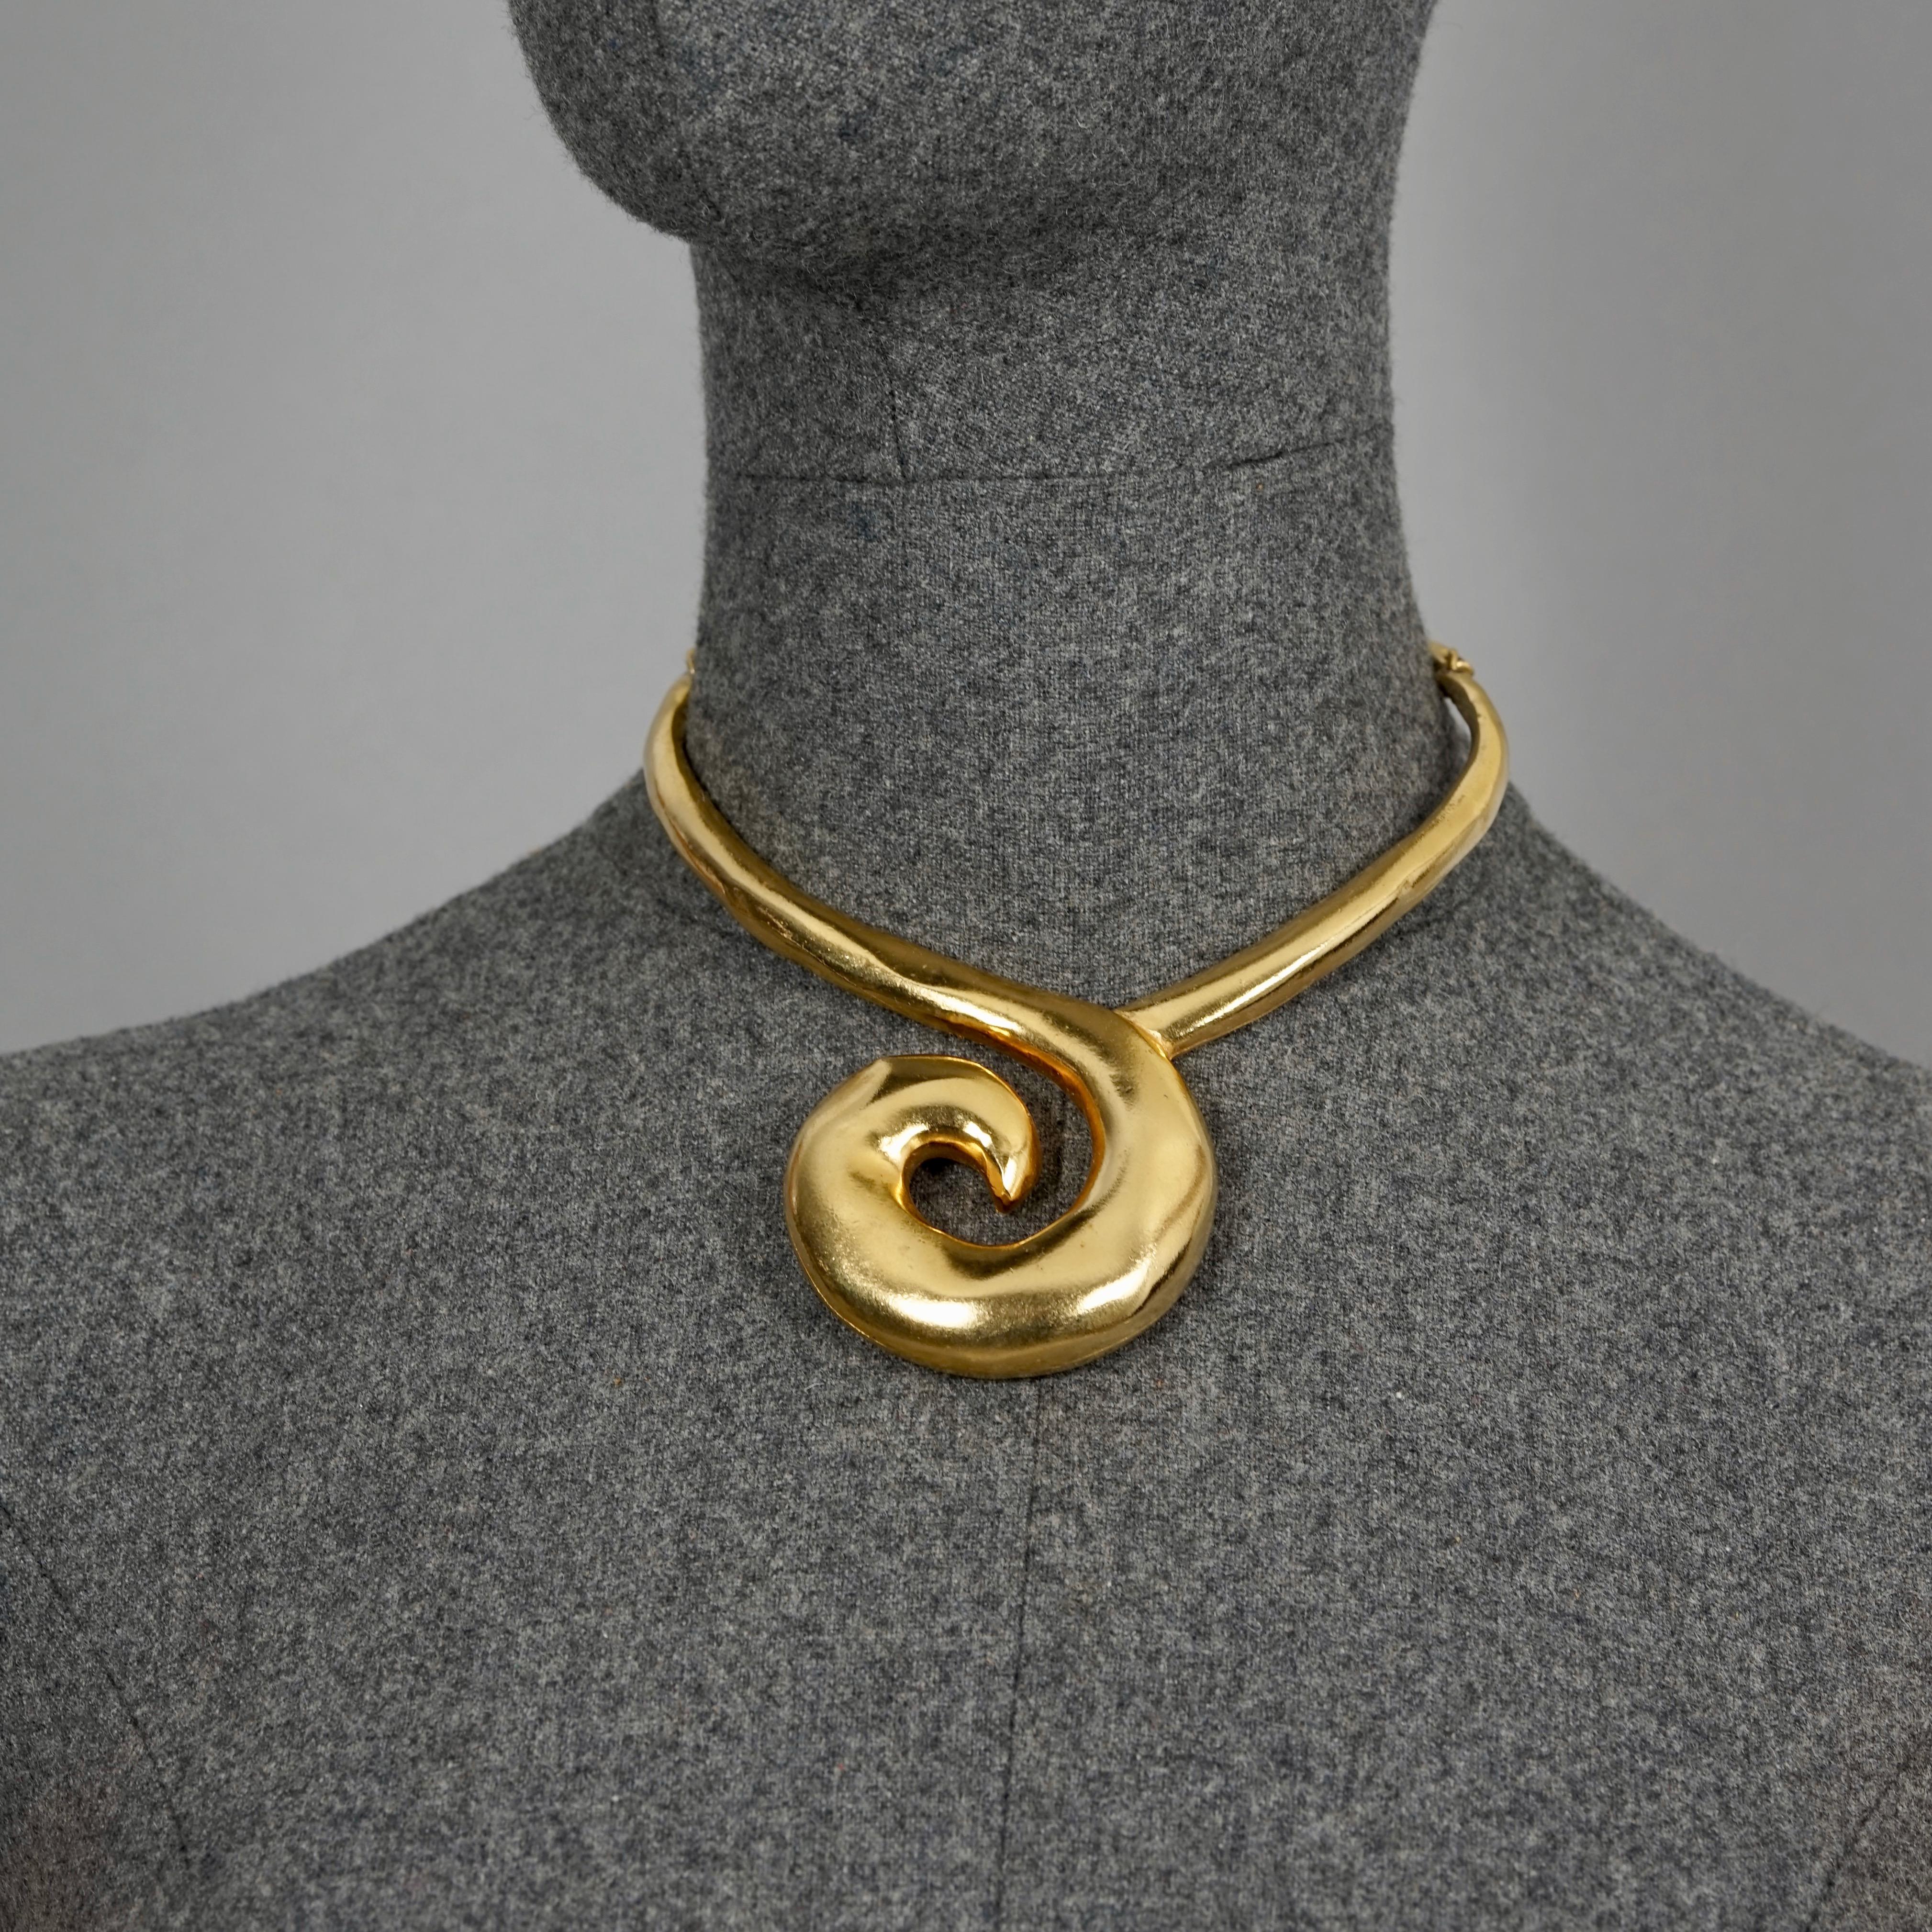 Vintage EDOUARD RAMBAUD Stylized Modernist Rigid Choker Necklace

Measurements:
Height: 2.28 inches (5.8 cm)
Wearable Length: 12 inches (30.5 cm) to 13.78 inches (35 cm)

Features:
- 100% Authentic EDOUARD RAMBAUD.
- Stylized modernist rigid